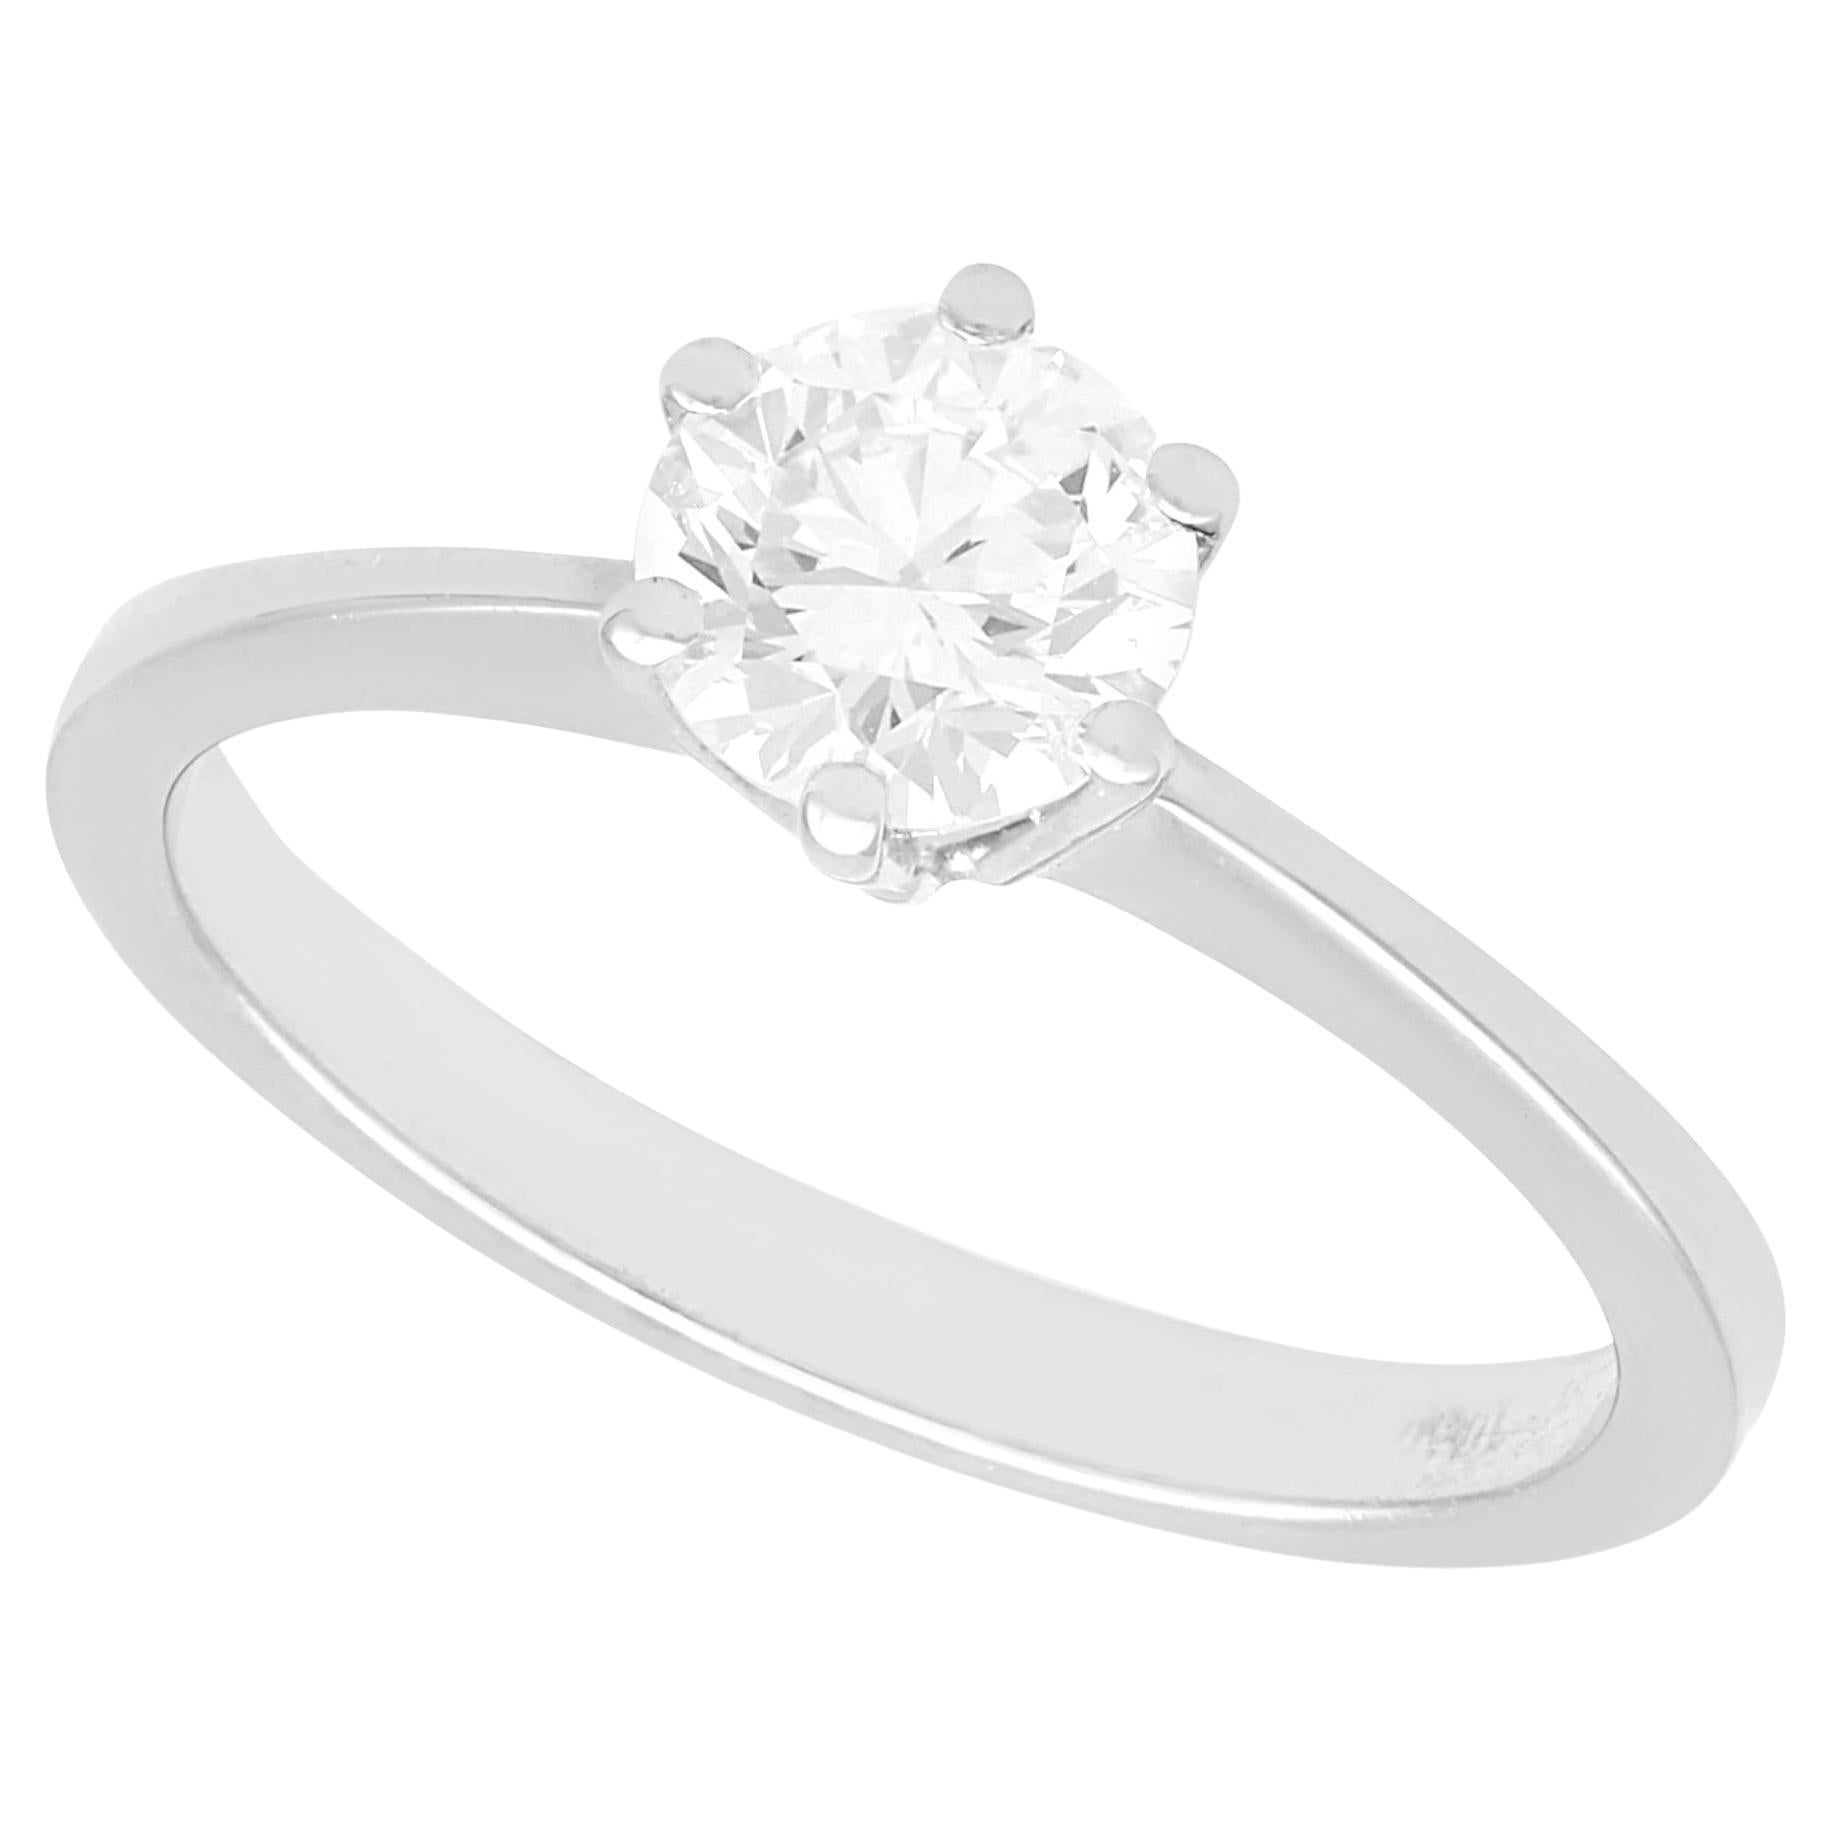 Vintage 0.72 Carat Diamond Solitaire Engagement Ring in 18k White Gold